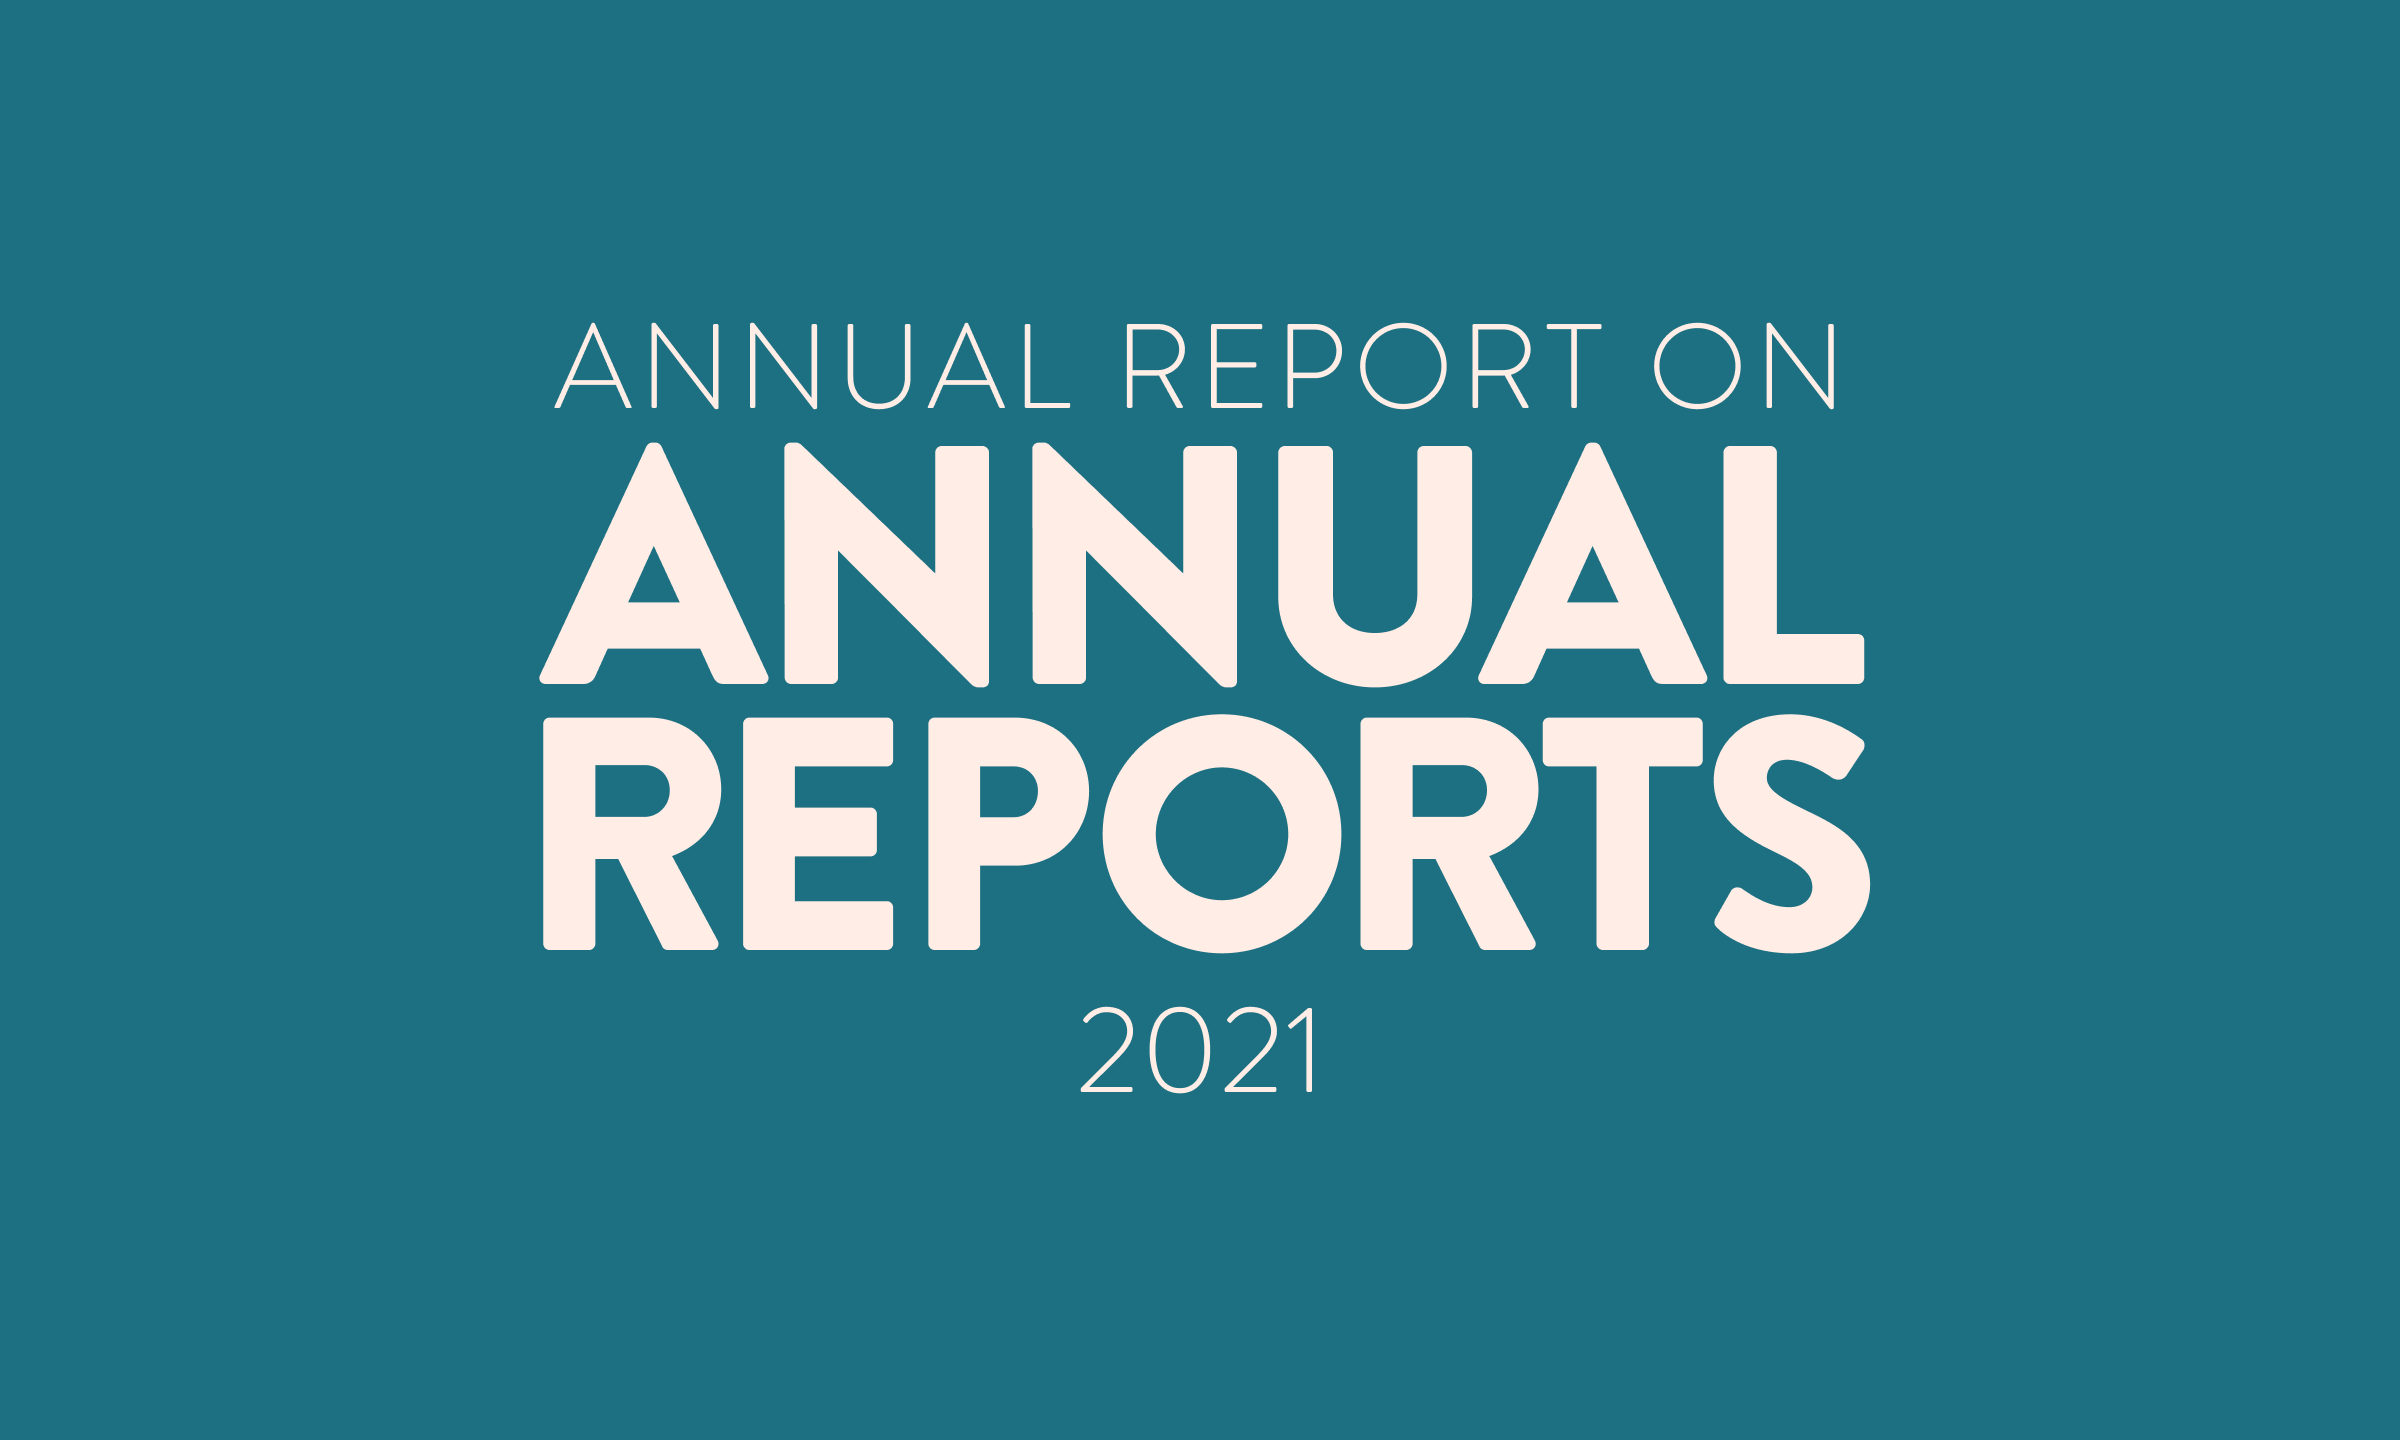 Annual Report on Annual Reports